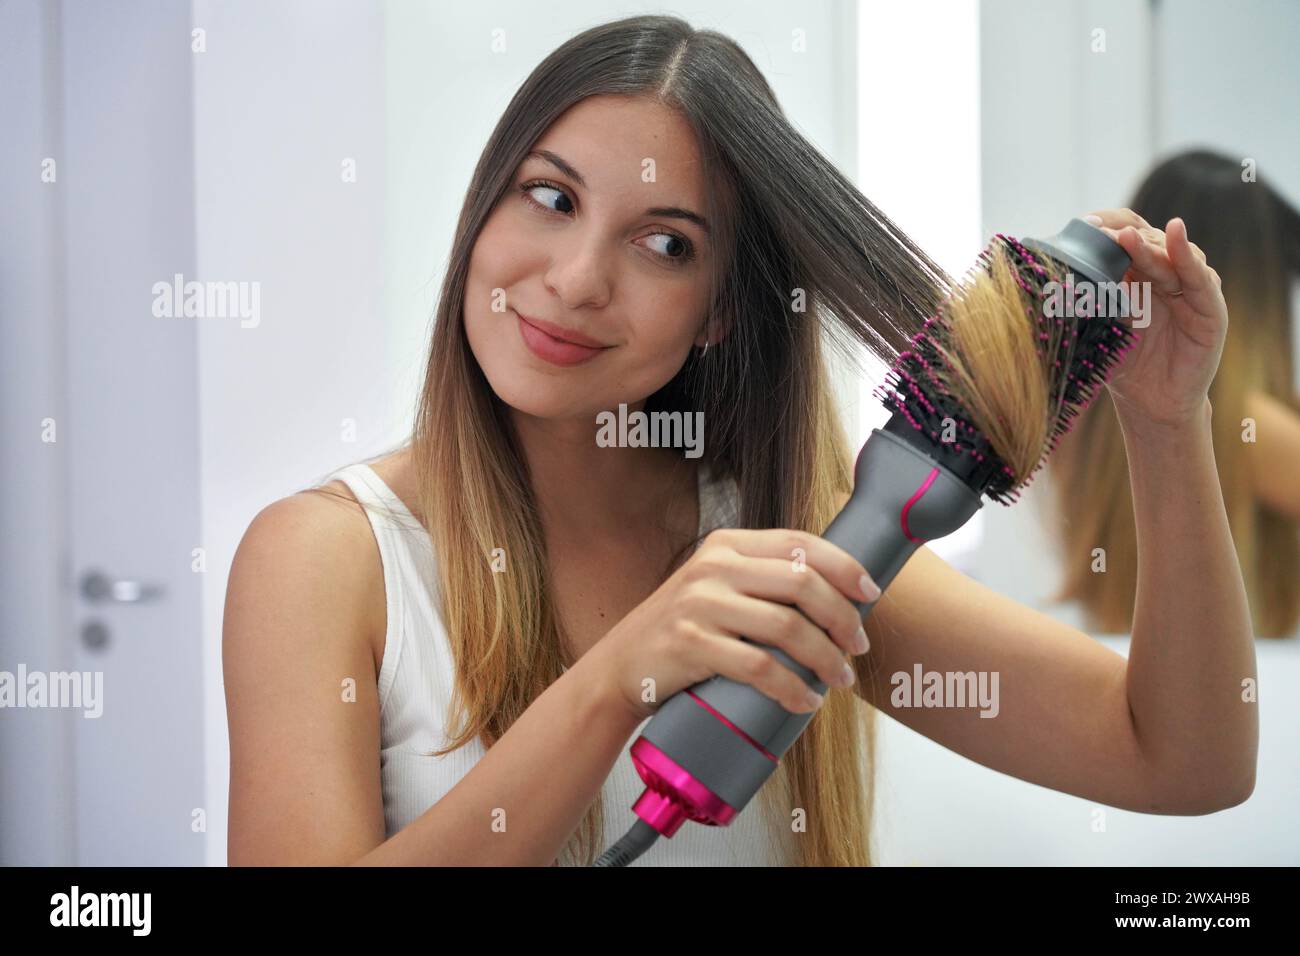 Hot air hair brush. Close-up of young woman using round brush hair dryer to style hair. Pretty girl using electric blowout brush hair dryer. Stock Photo